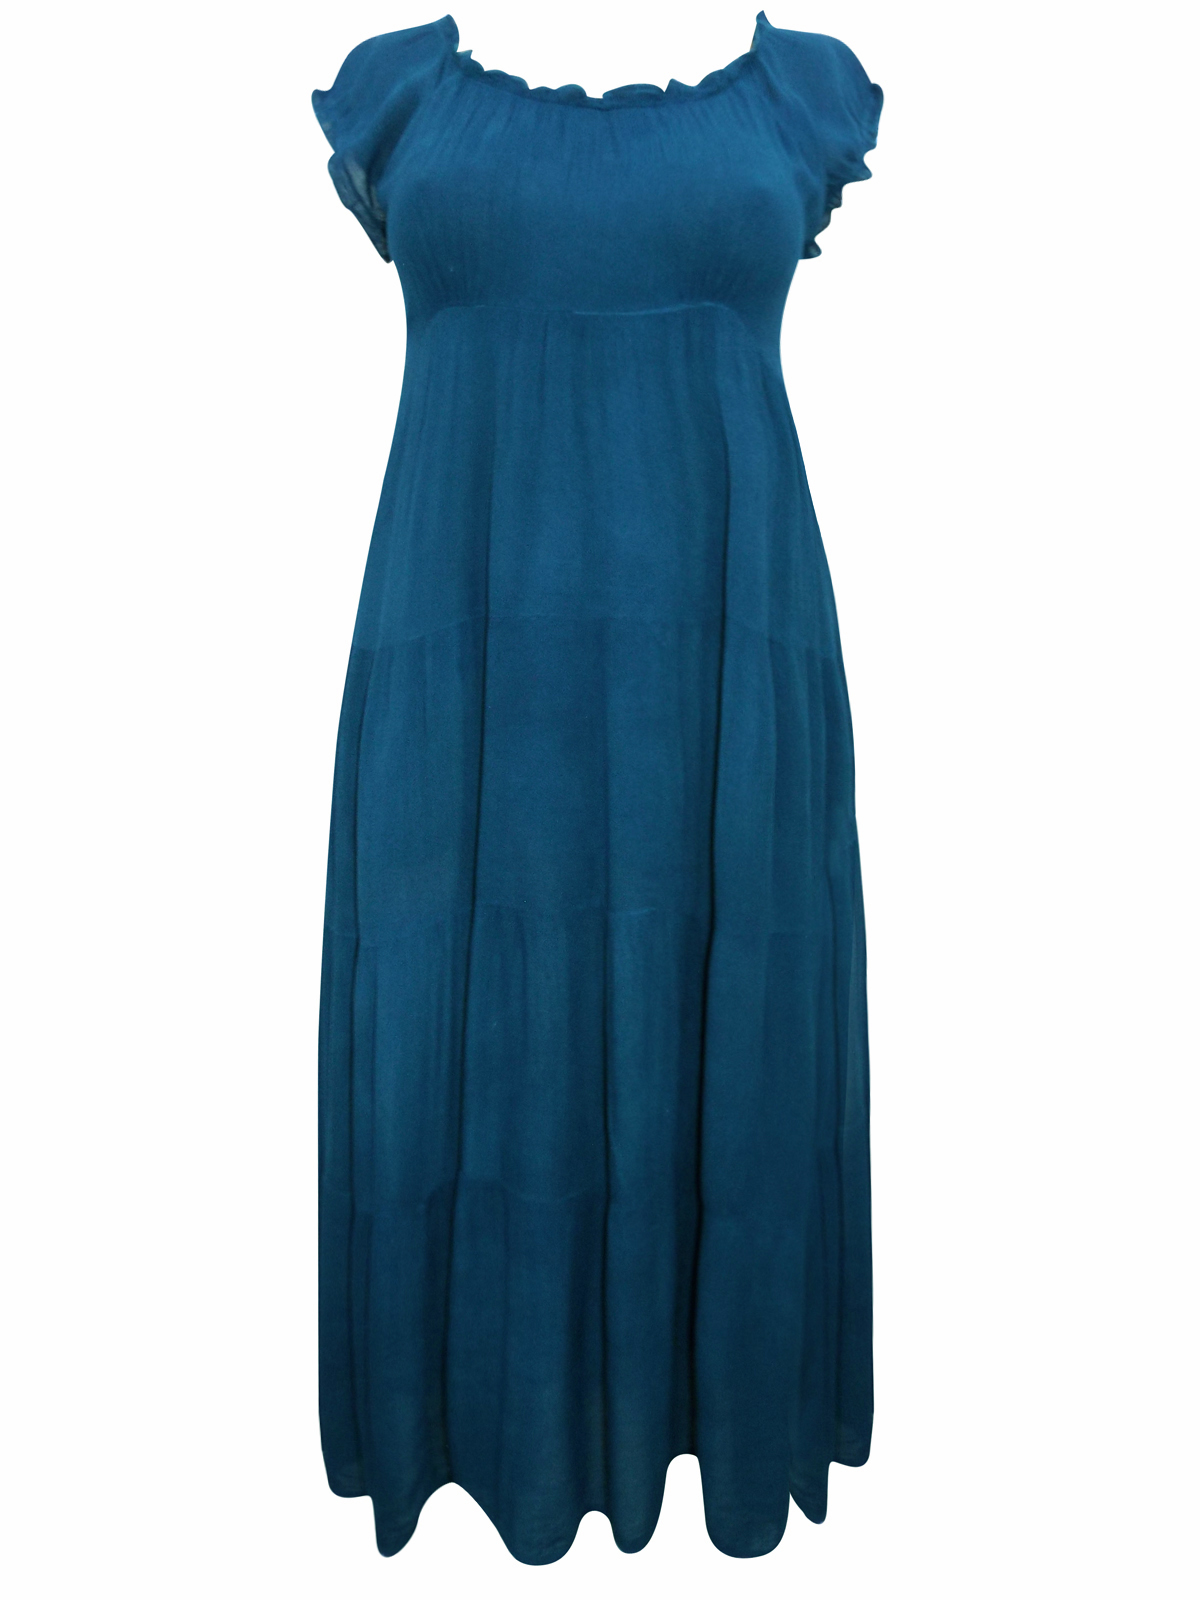 eaonplus TEAL On-Off Shoulder Gypsy Tiered Maxi Dress - Plus Size 14/16 ...